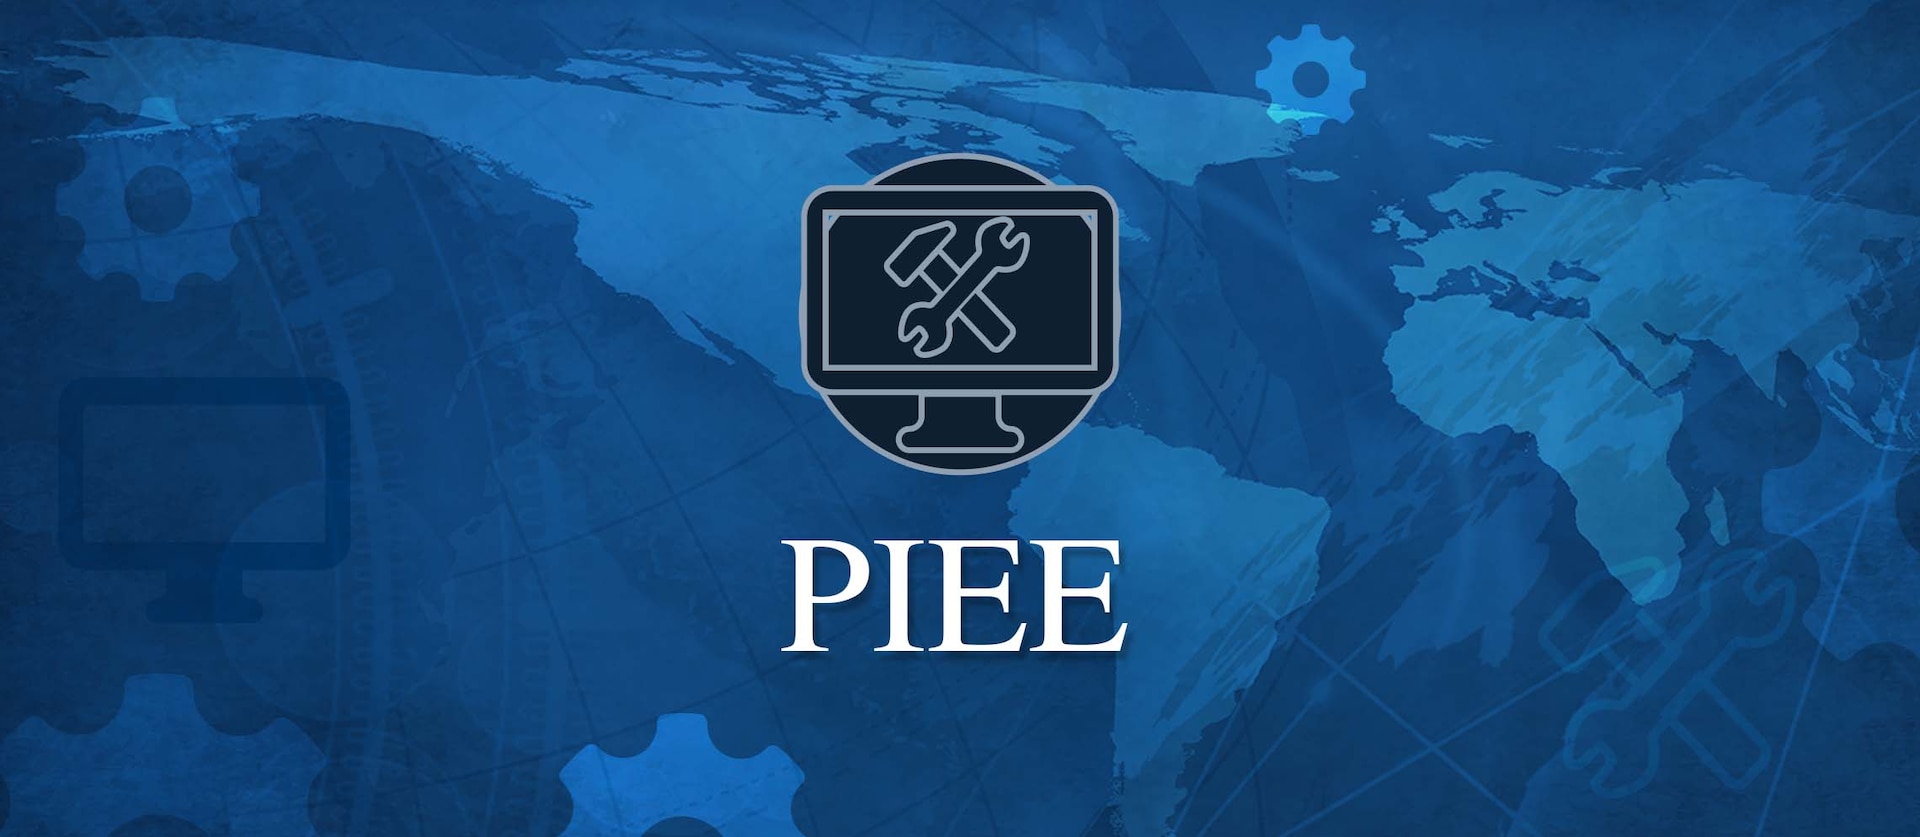 Banner for PIEE application